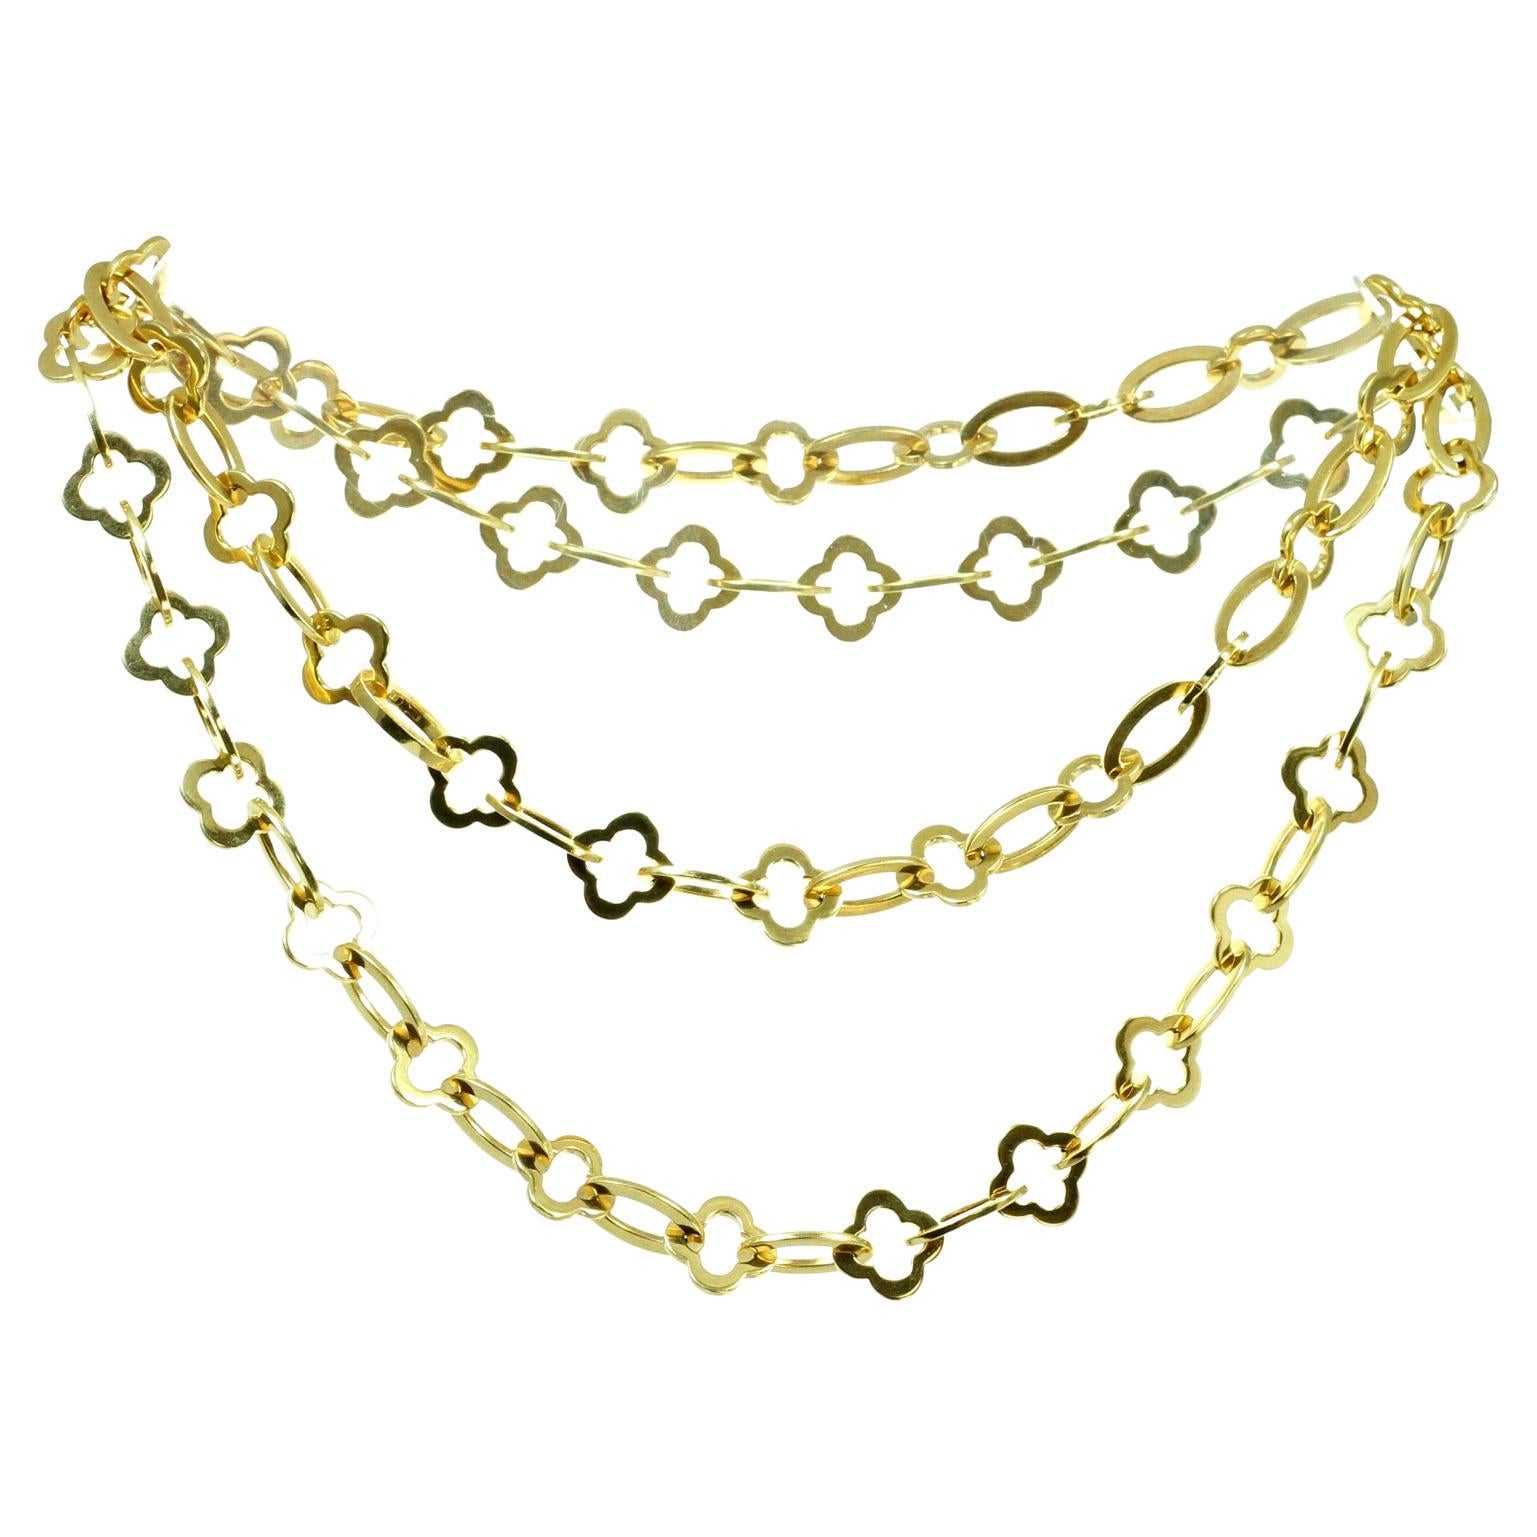 VAN CLEEF & ARPELS Byzantine Alhambra 18k Yellow Gold Long Chain Necklace